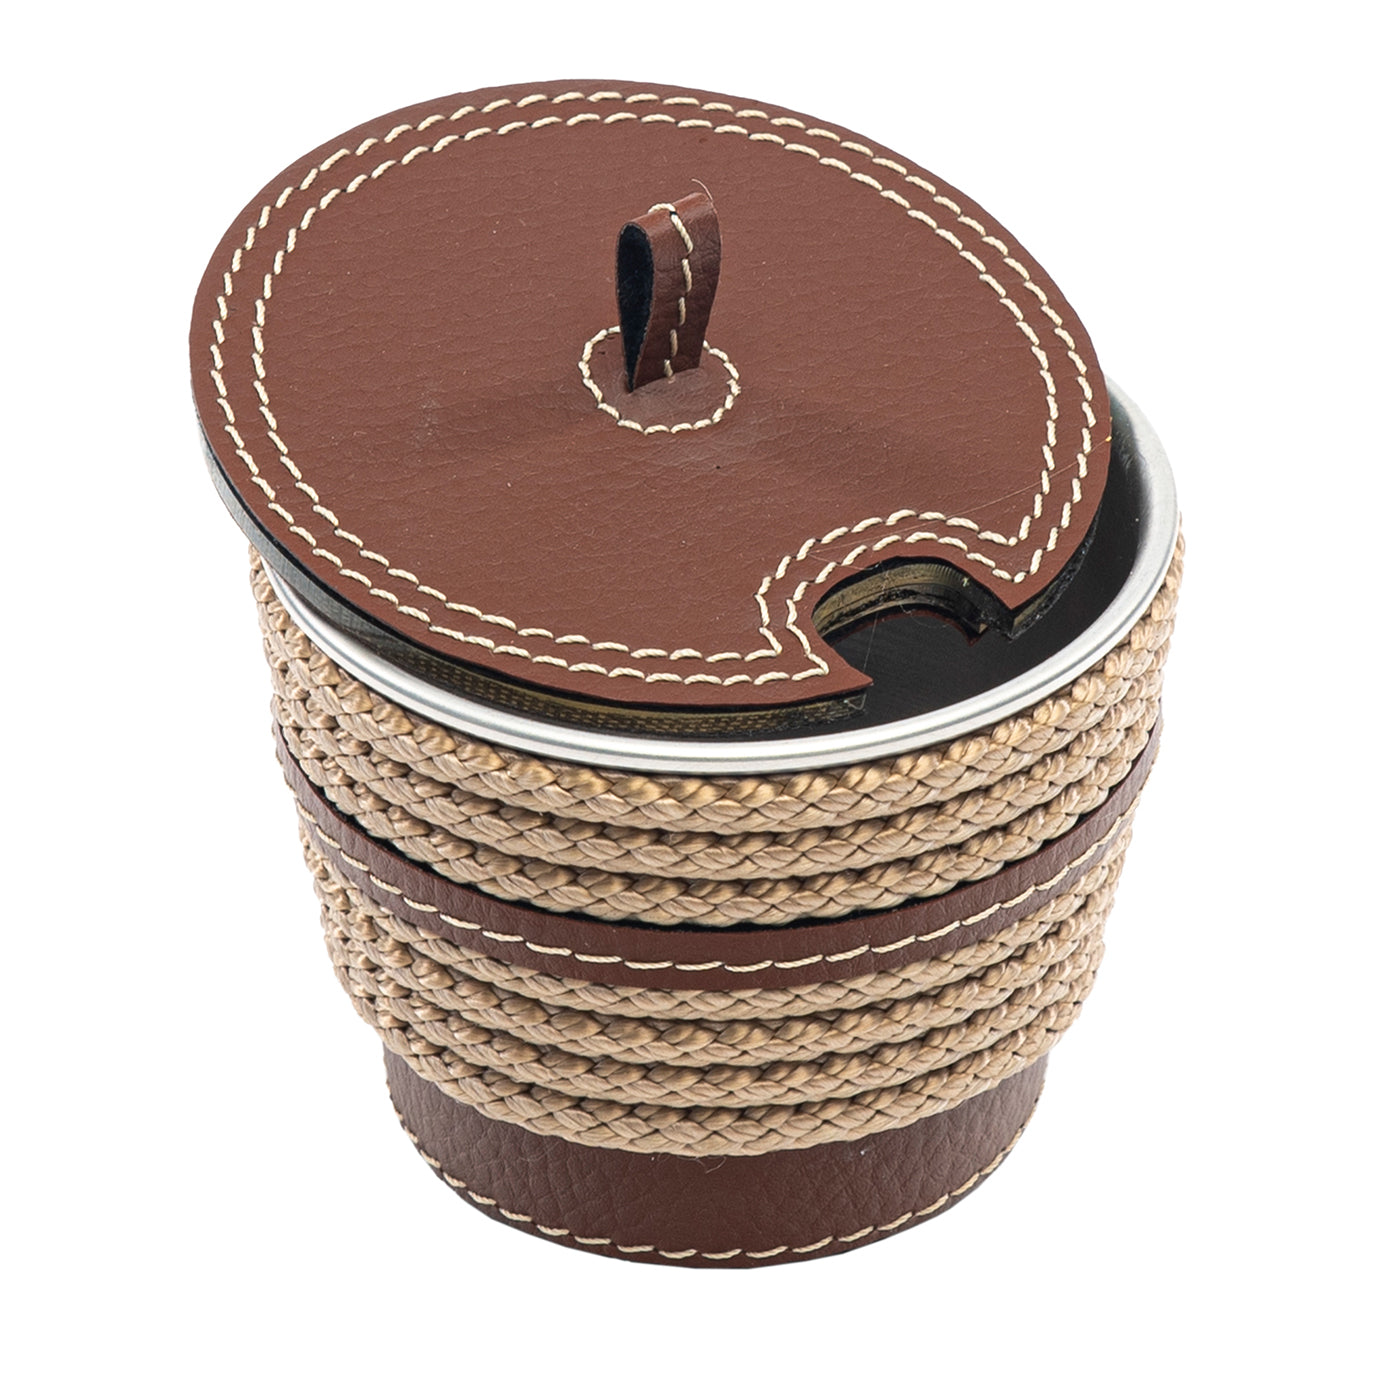 Beige Eco-Leather Sugar Bowl with Rope Inserts - Main view